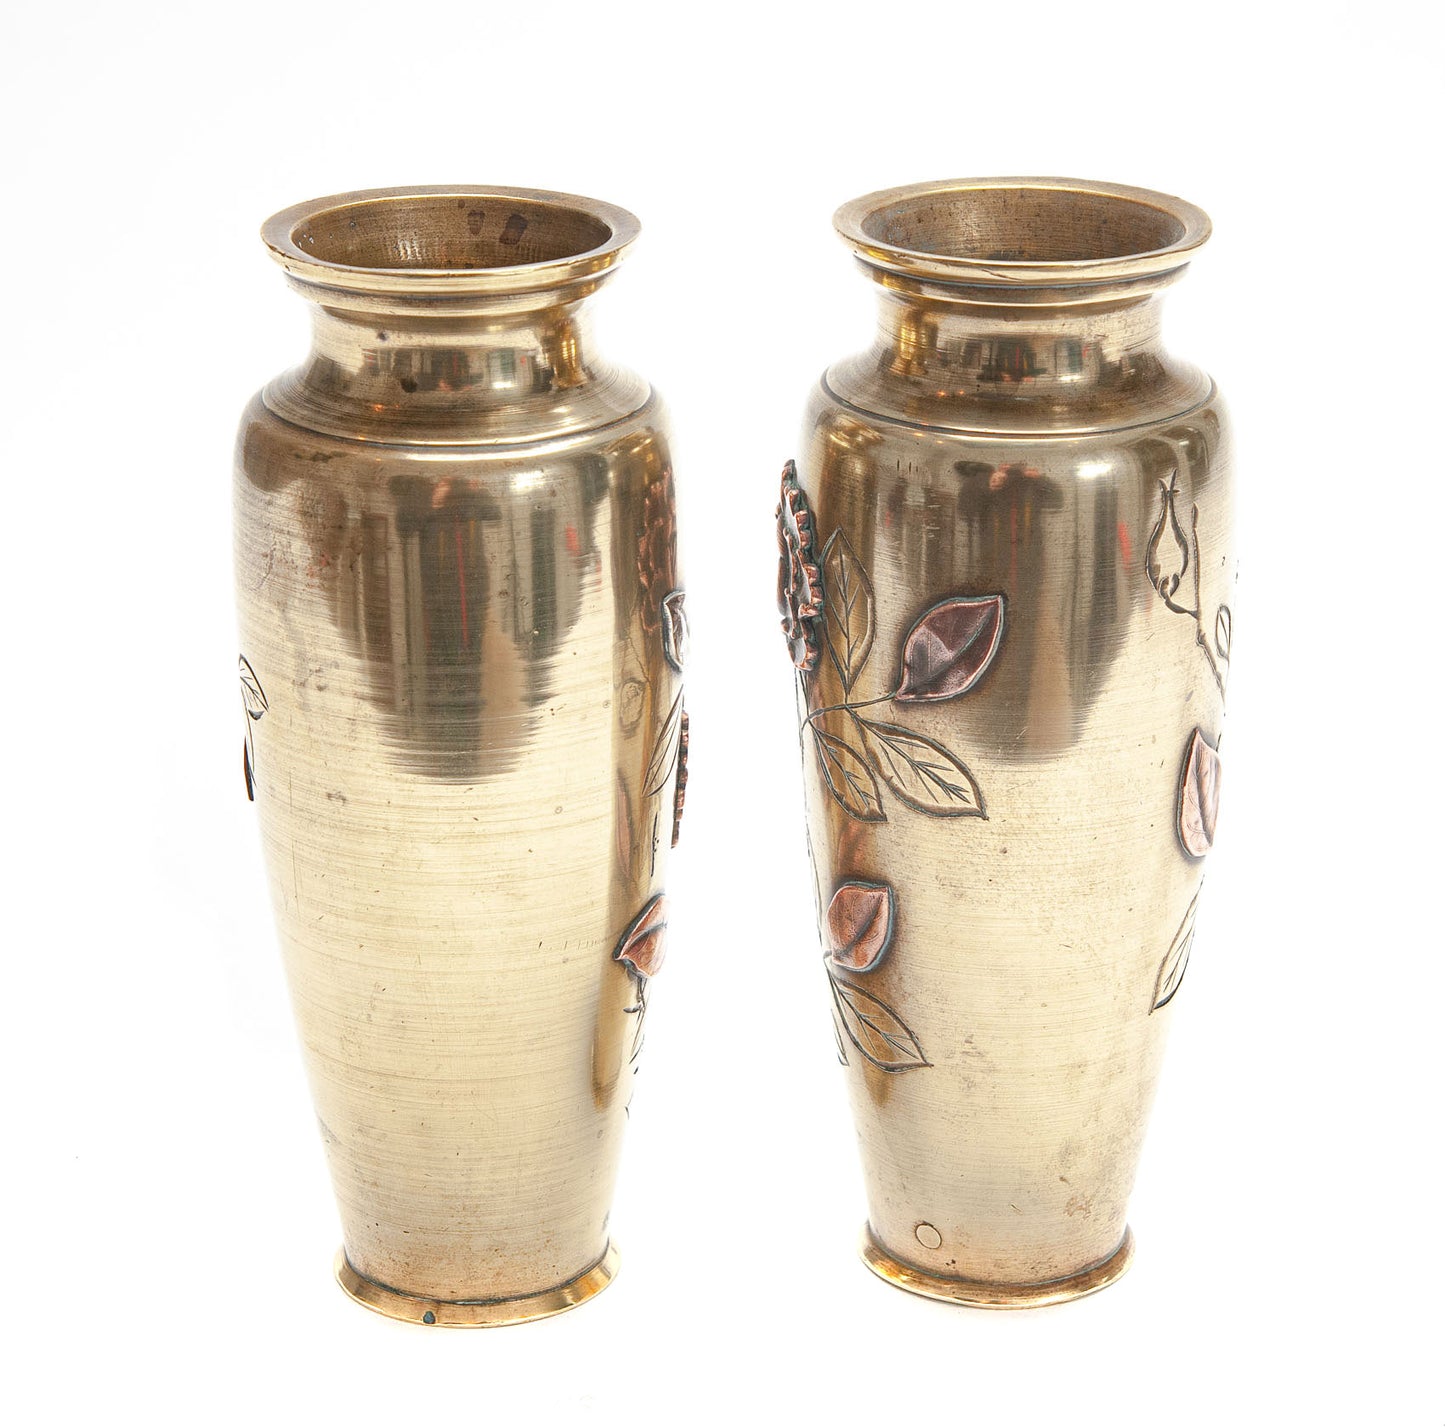 Pair Antique Japanese Meiji Period Mixed Metal Brass Copper & Silver Vases (Code 1985)